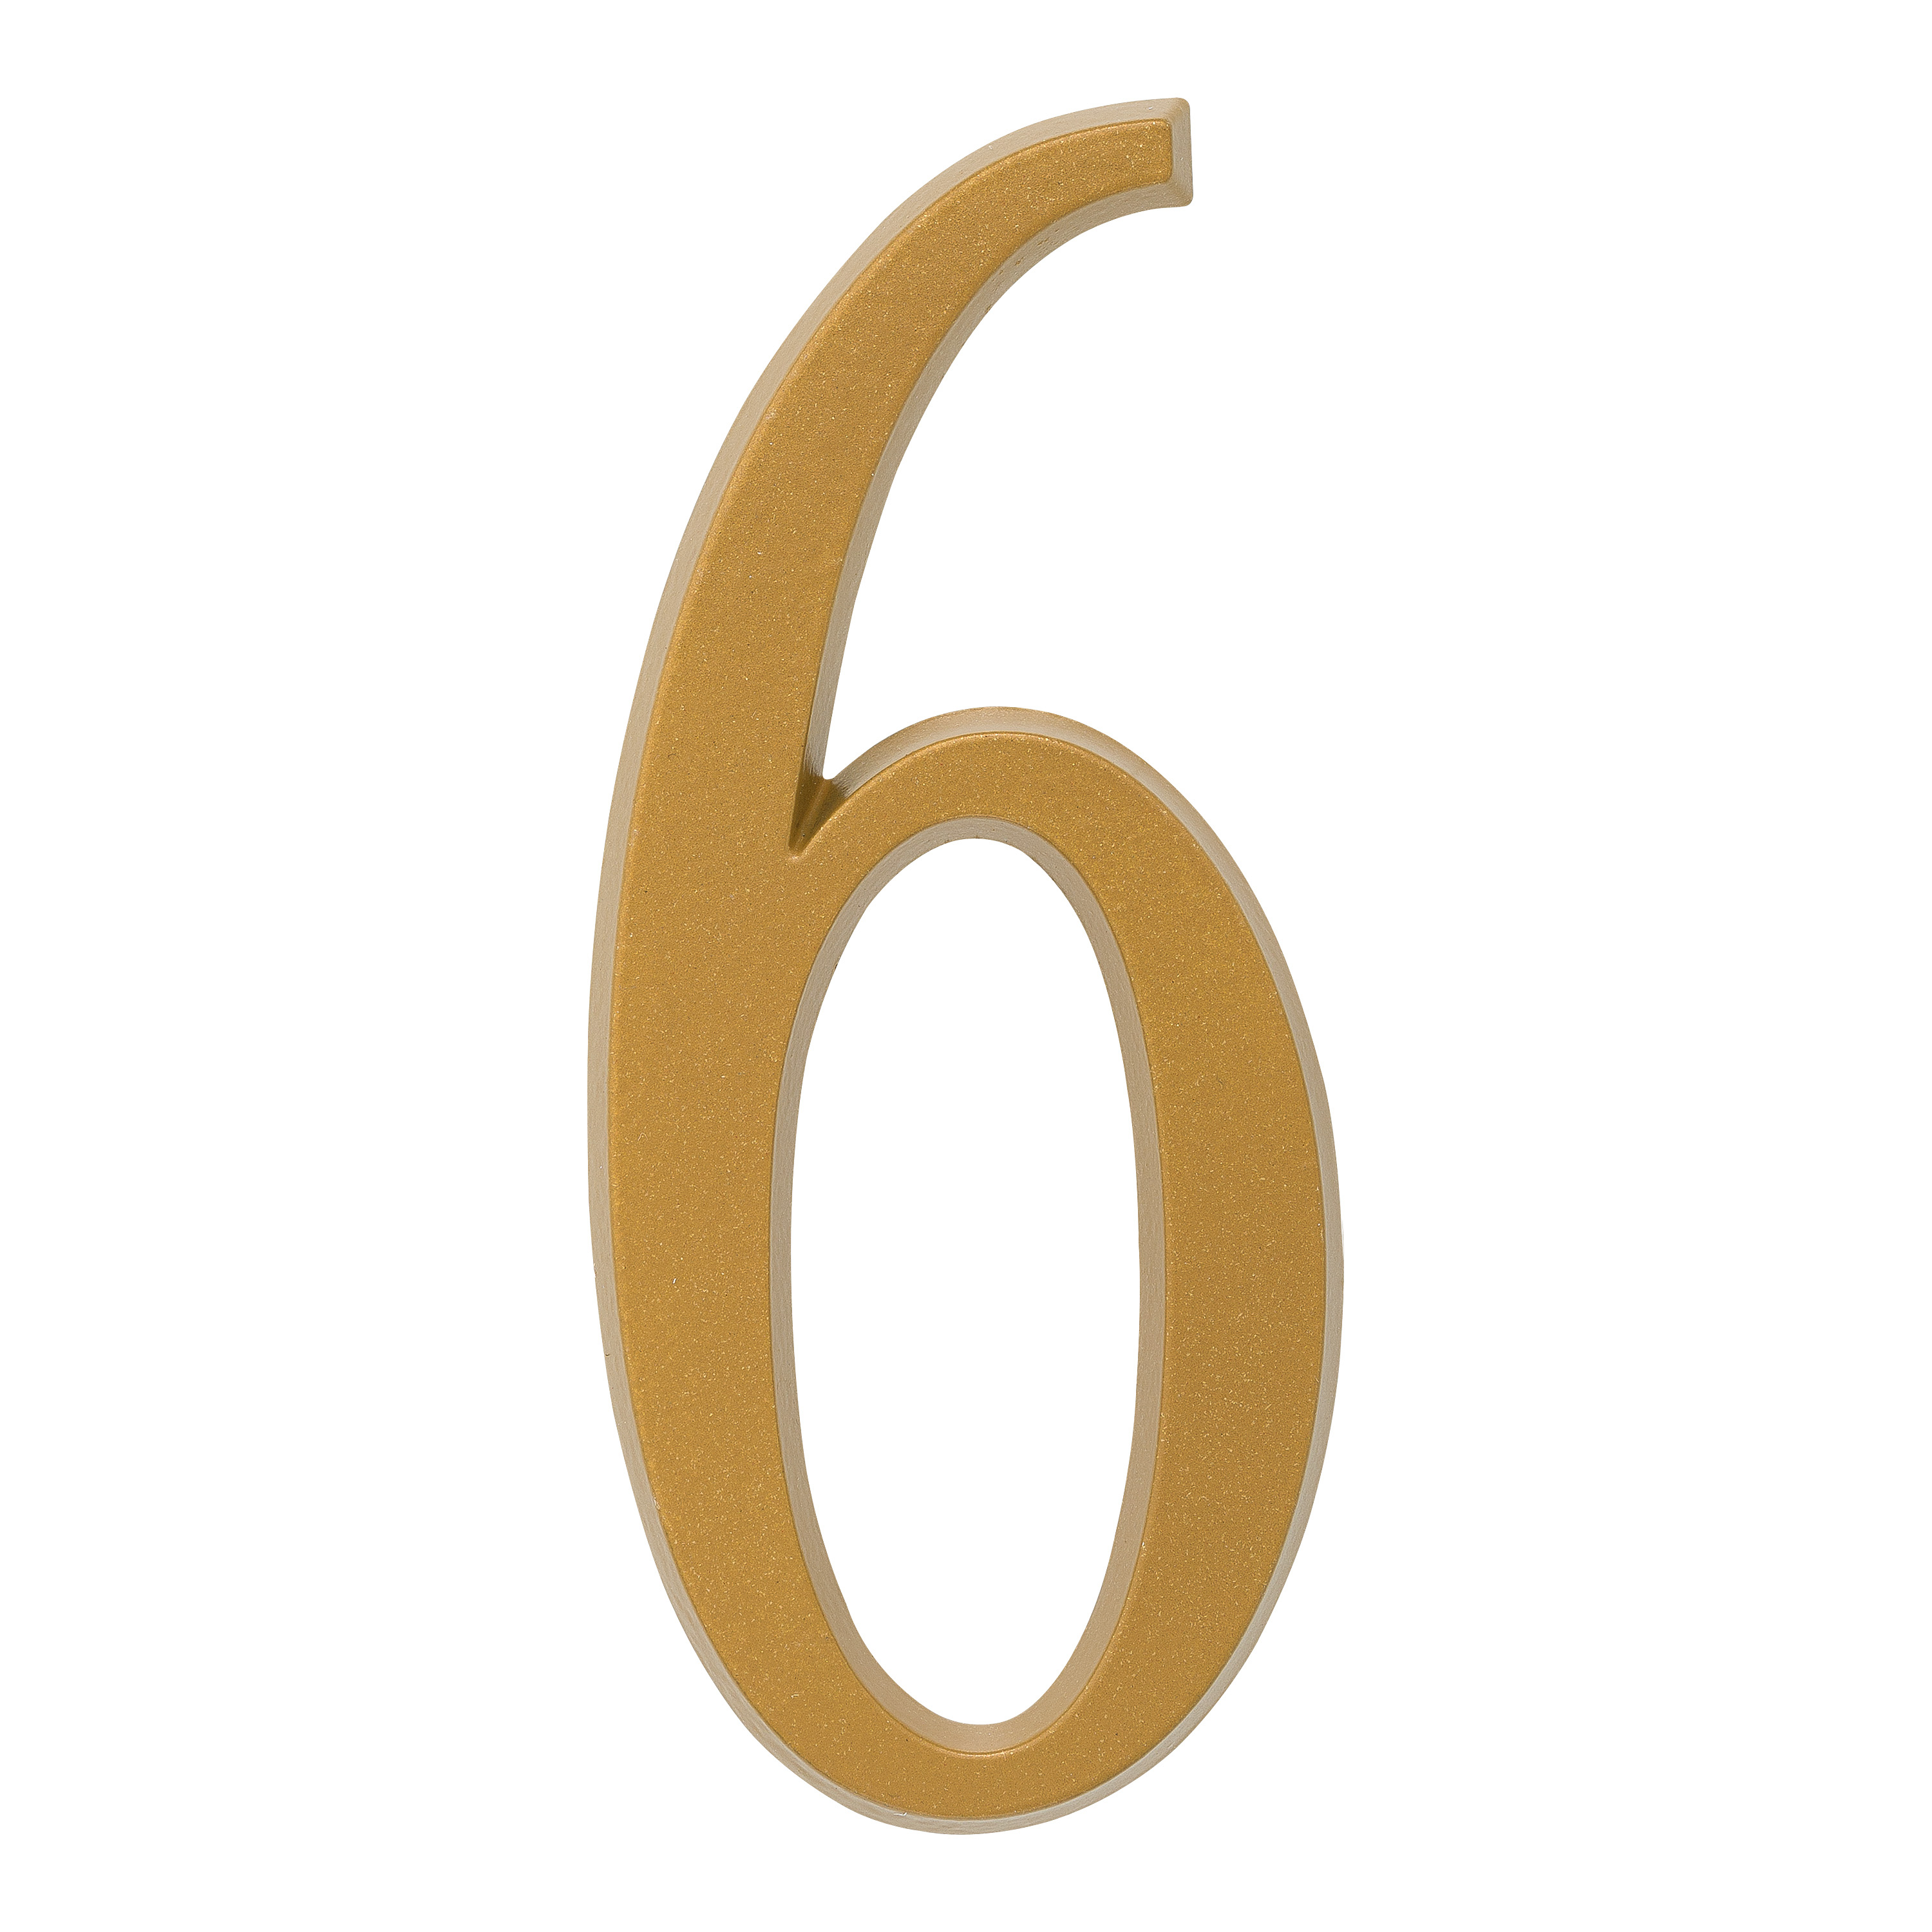 Whitehall 4.75 inch Gold House Address Number - 6